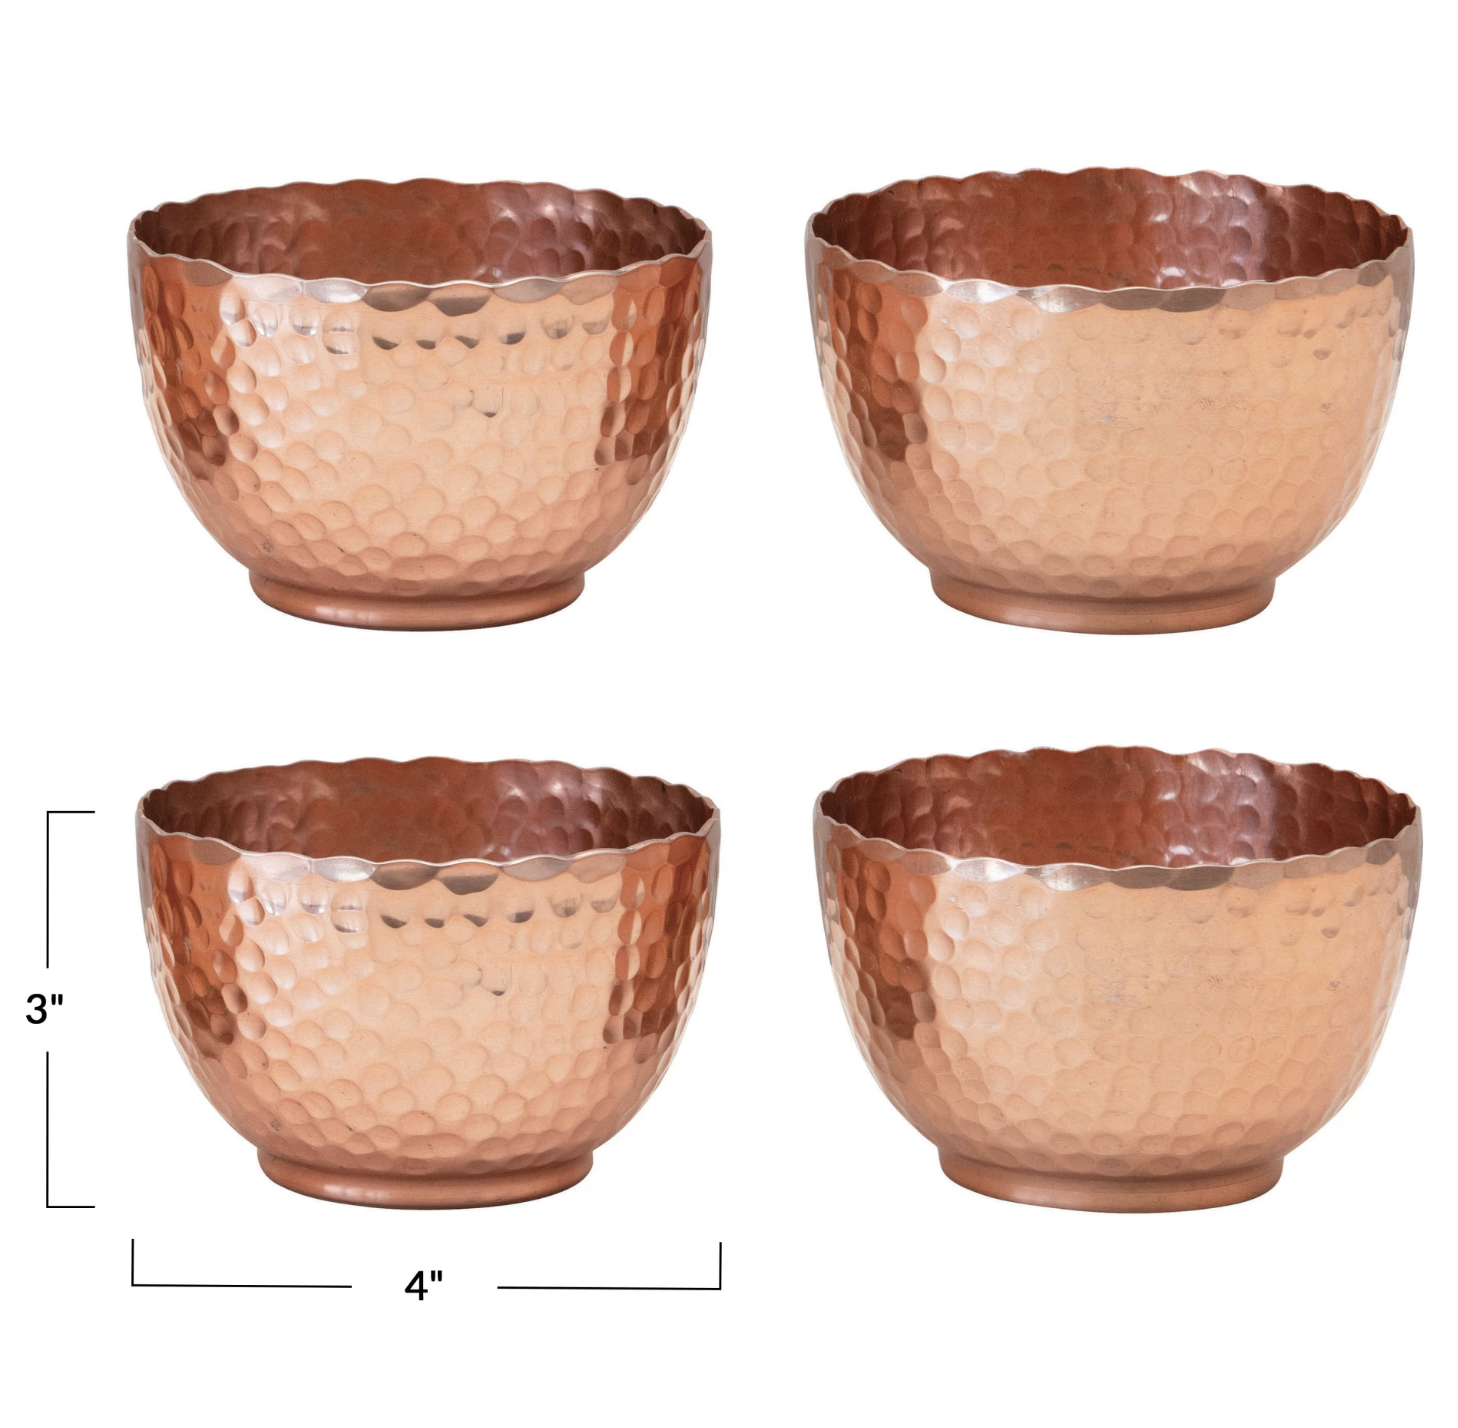 available at m. lynne designs Hammered Copper Bowls with Jute Tie